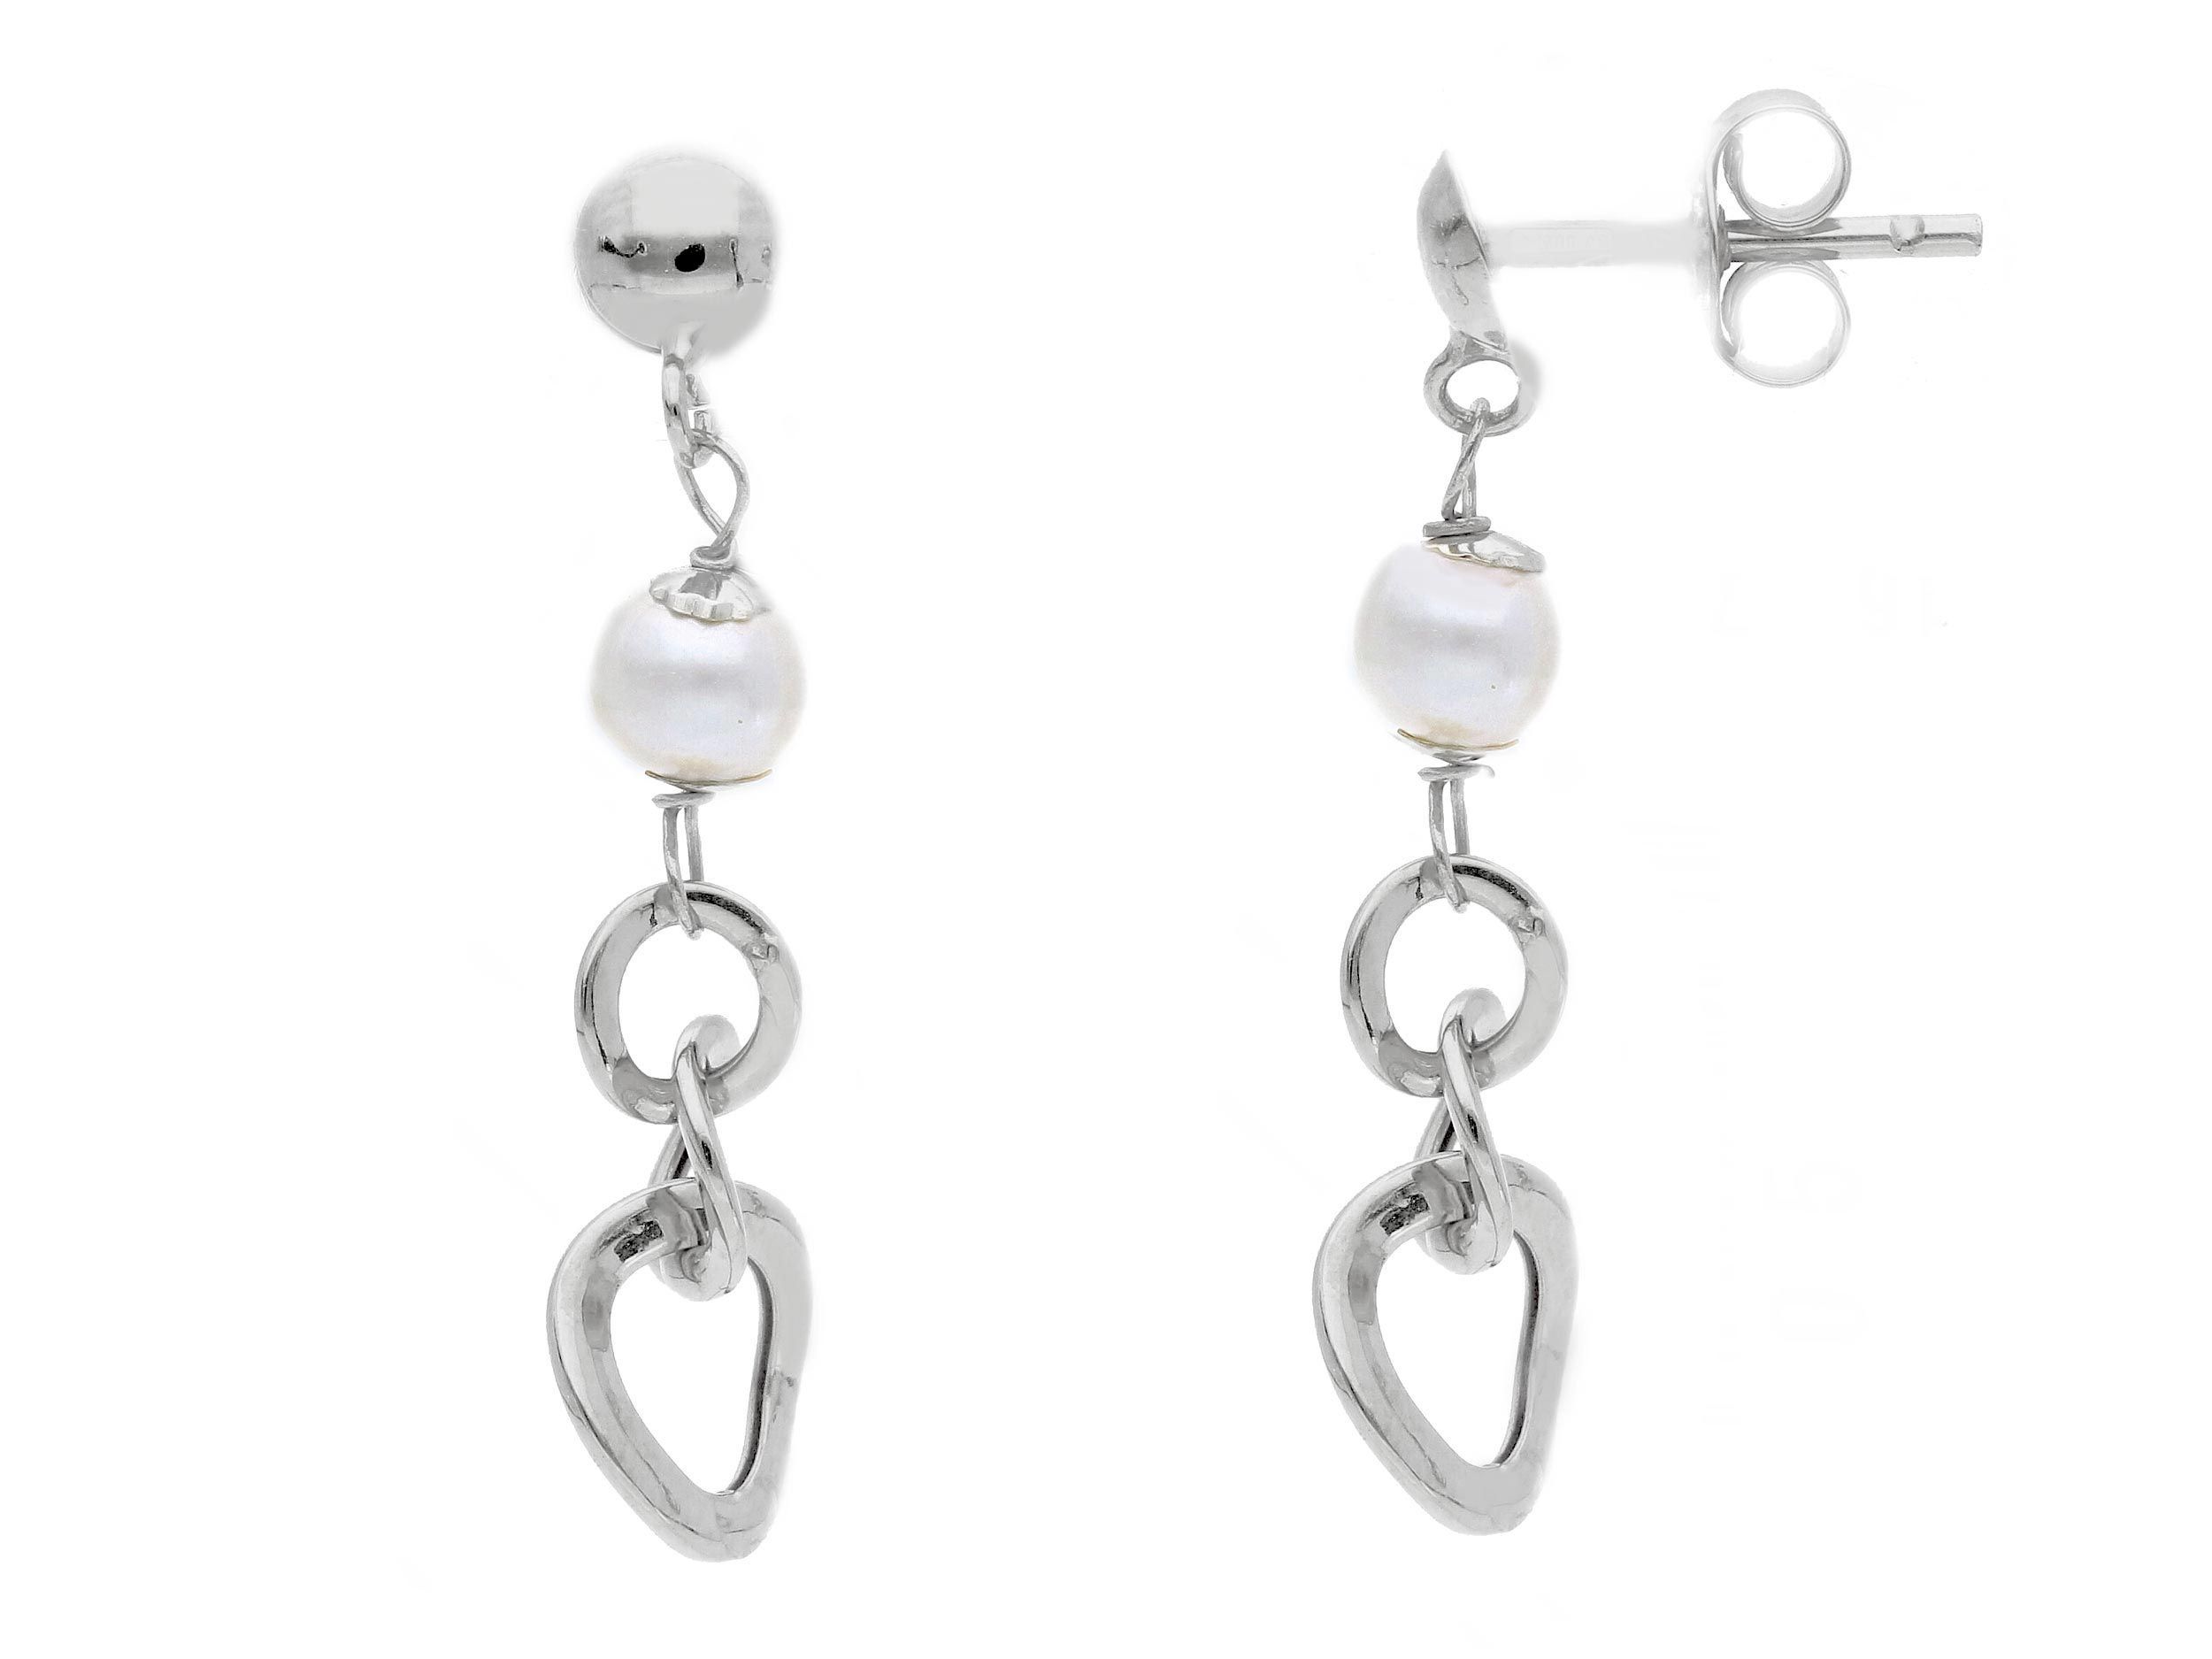 White gold earrigs 9k with pearls  (code S202523)